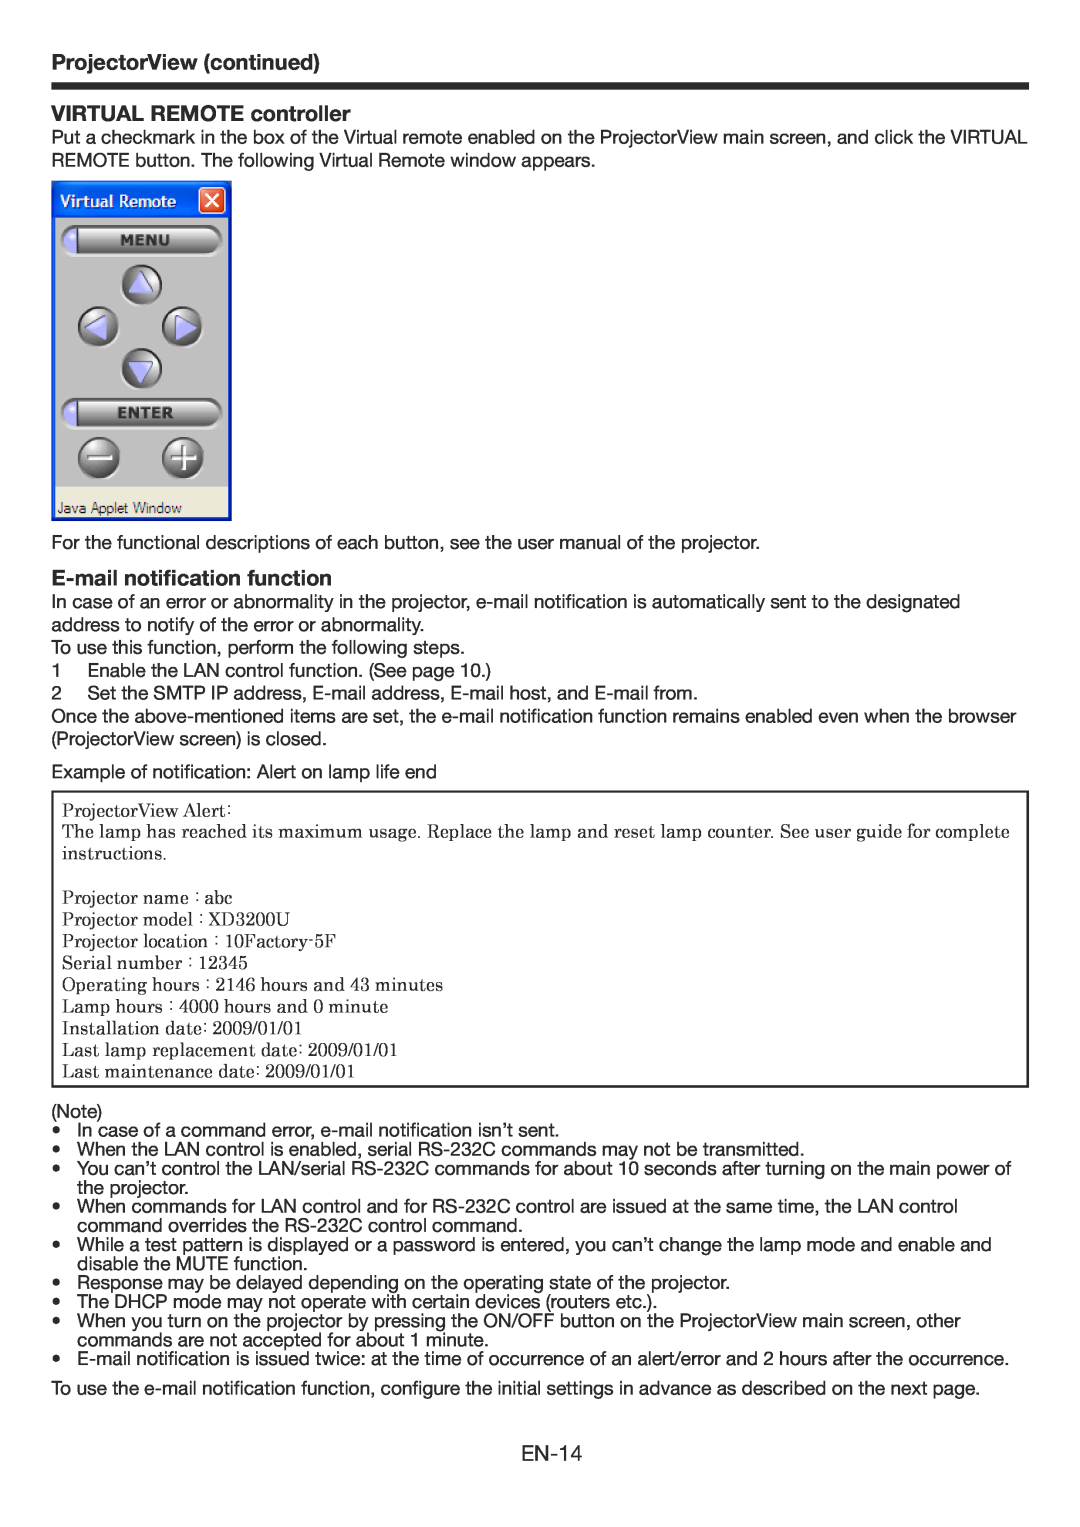 Mitsubishi Electronics XD3200U ProjectorView continued VIRTUAL REMOTE controller, E-mail notification function, EN-14 